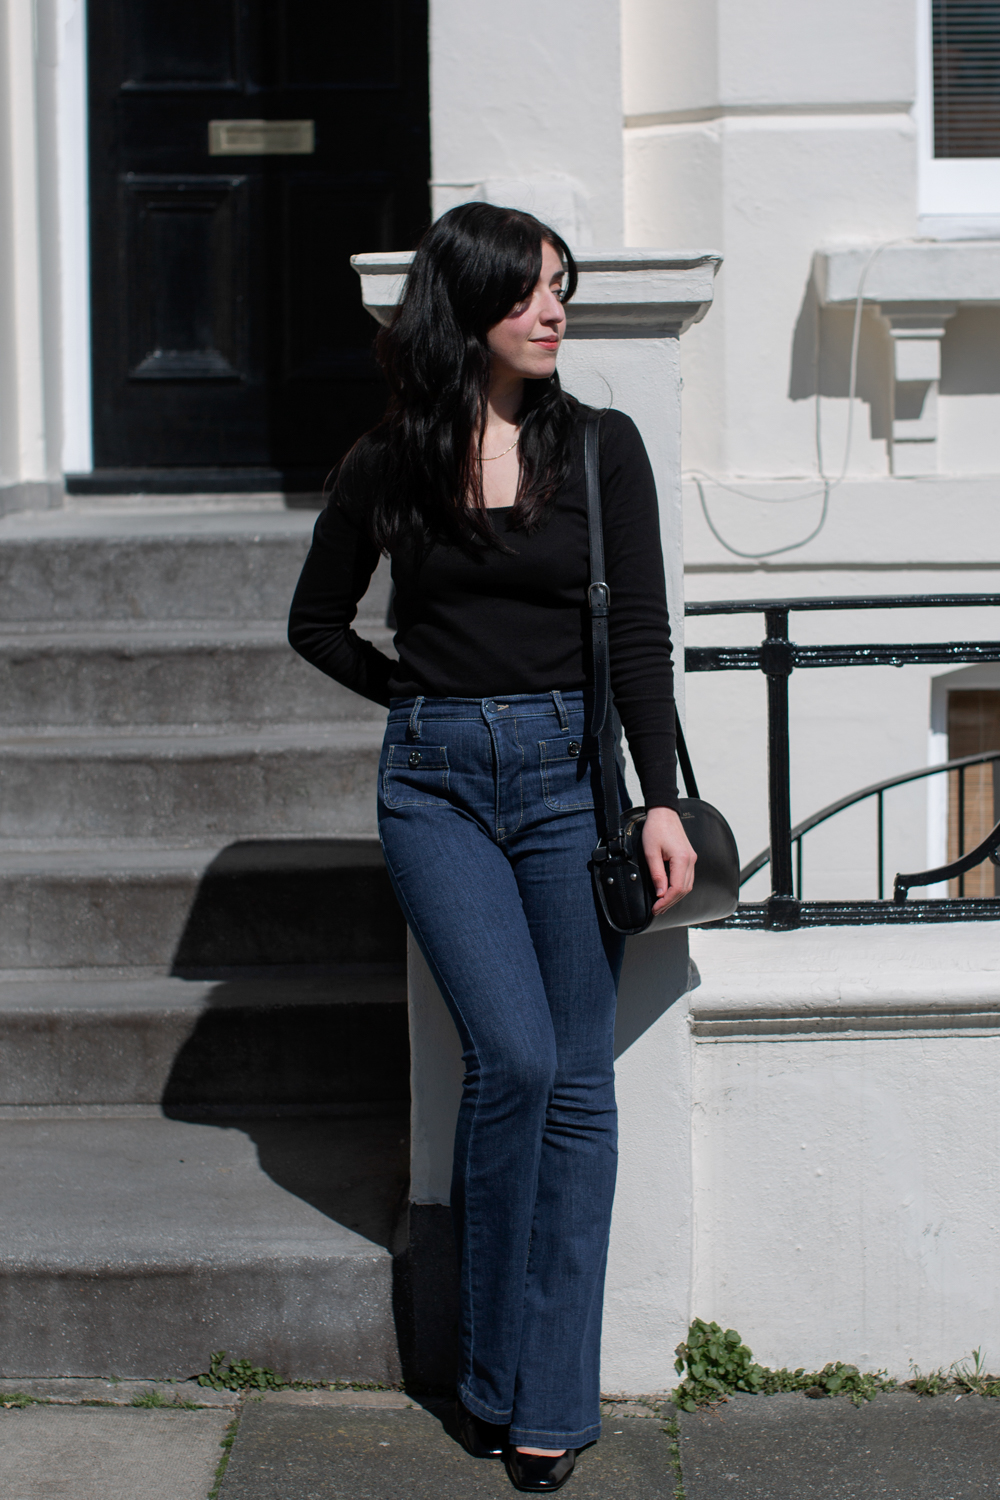 Besma leans against wall wearing black top and jeans